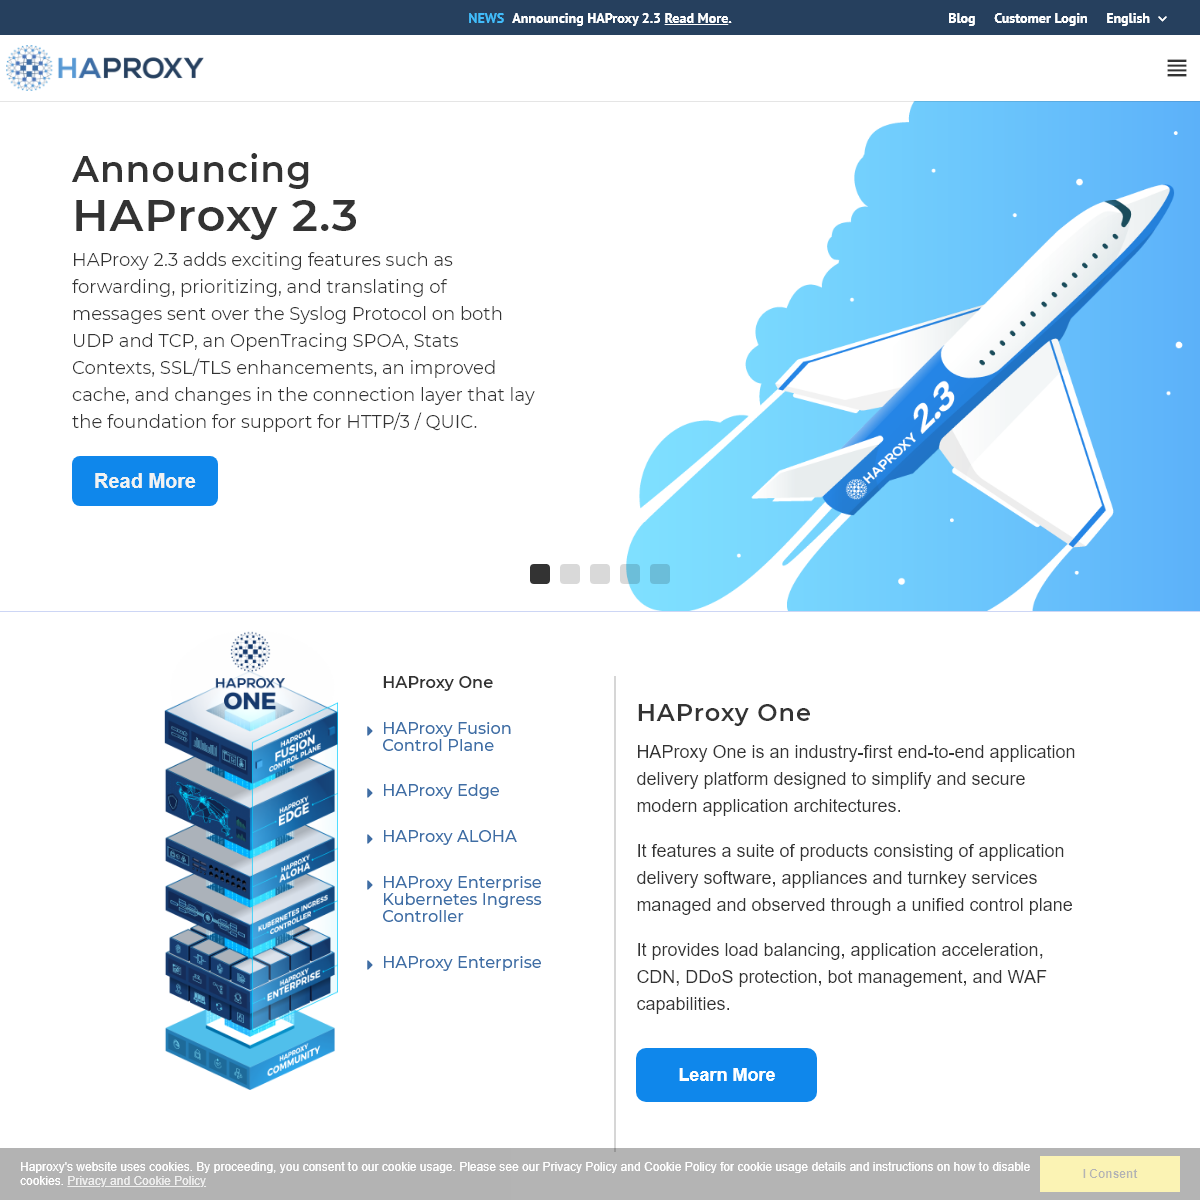 A complete backup of haproxy.com